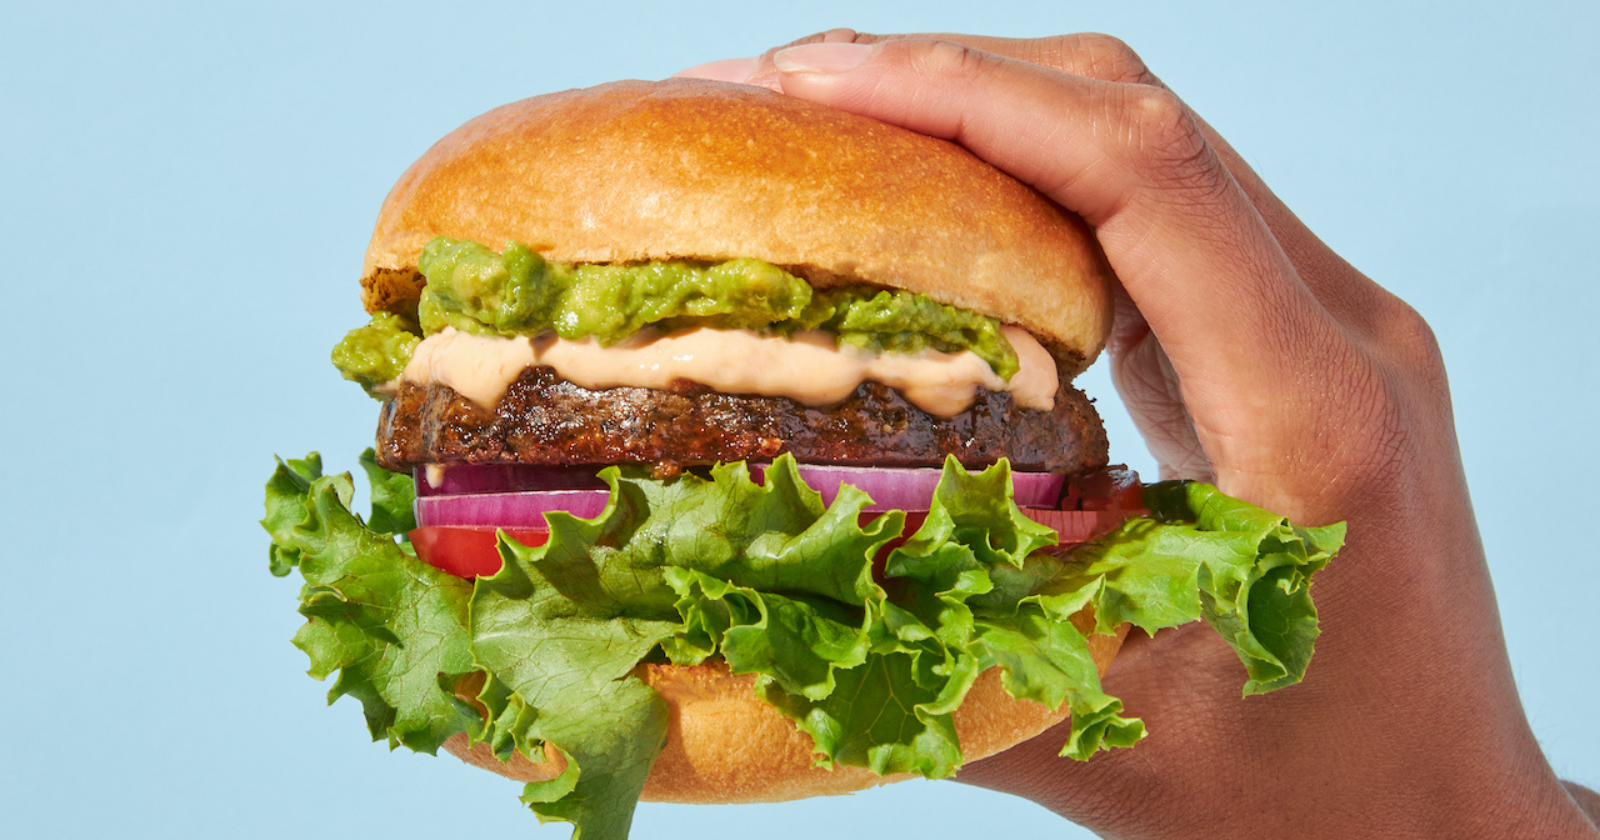 United States: Planet Based Foods launches first hemp-based meat products